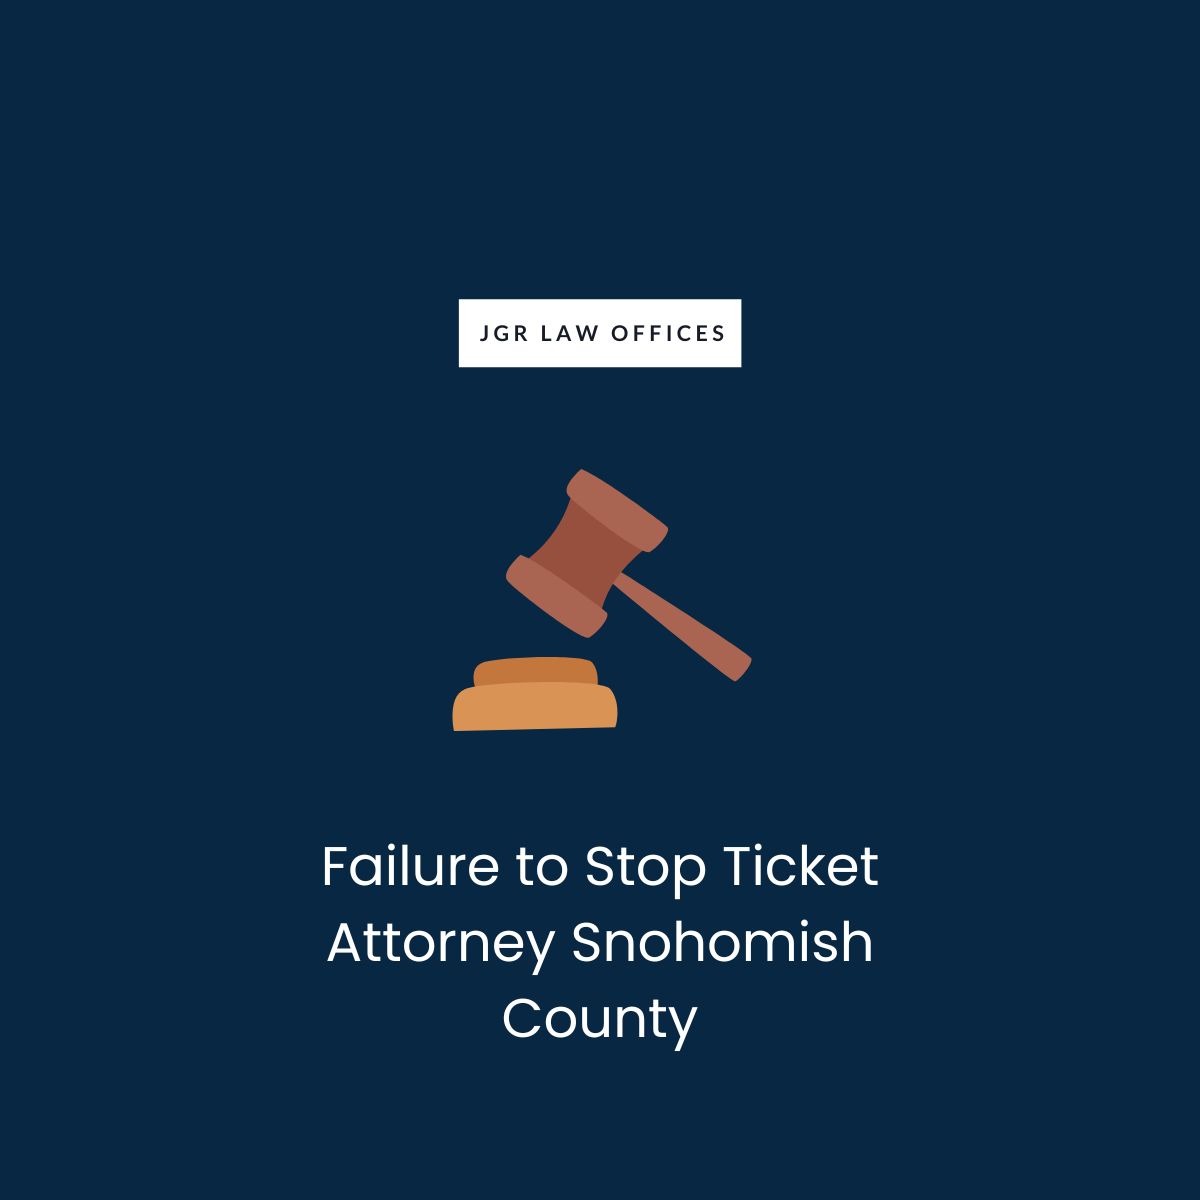 Failure to Stop Ticket Attorney Snohomish County